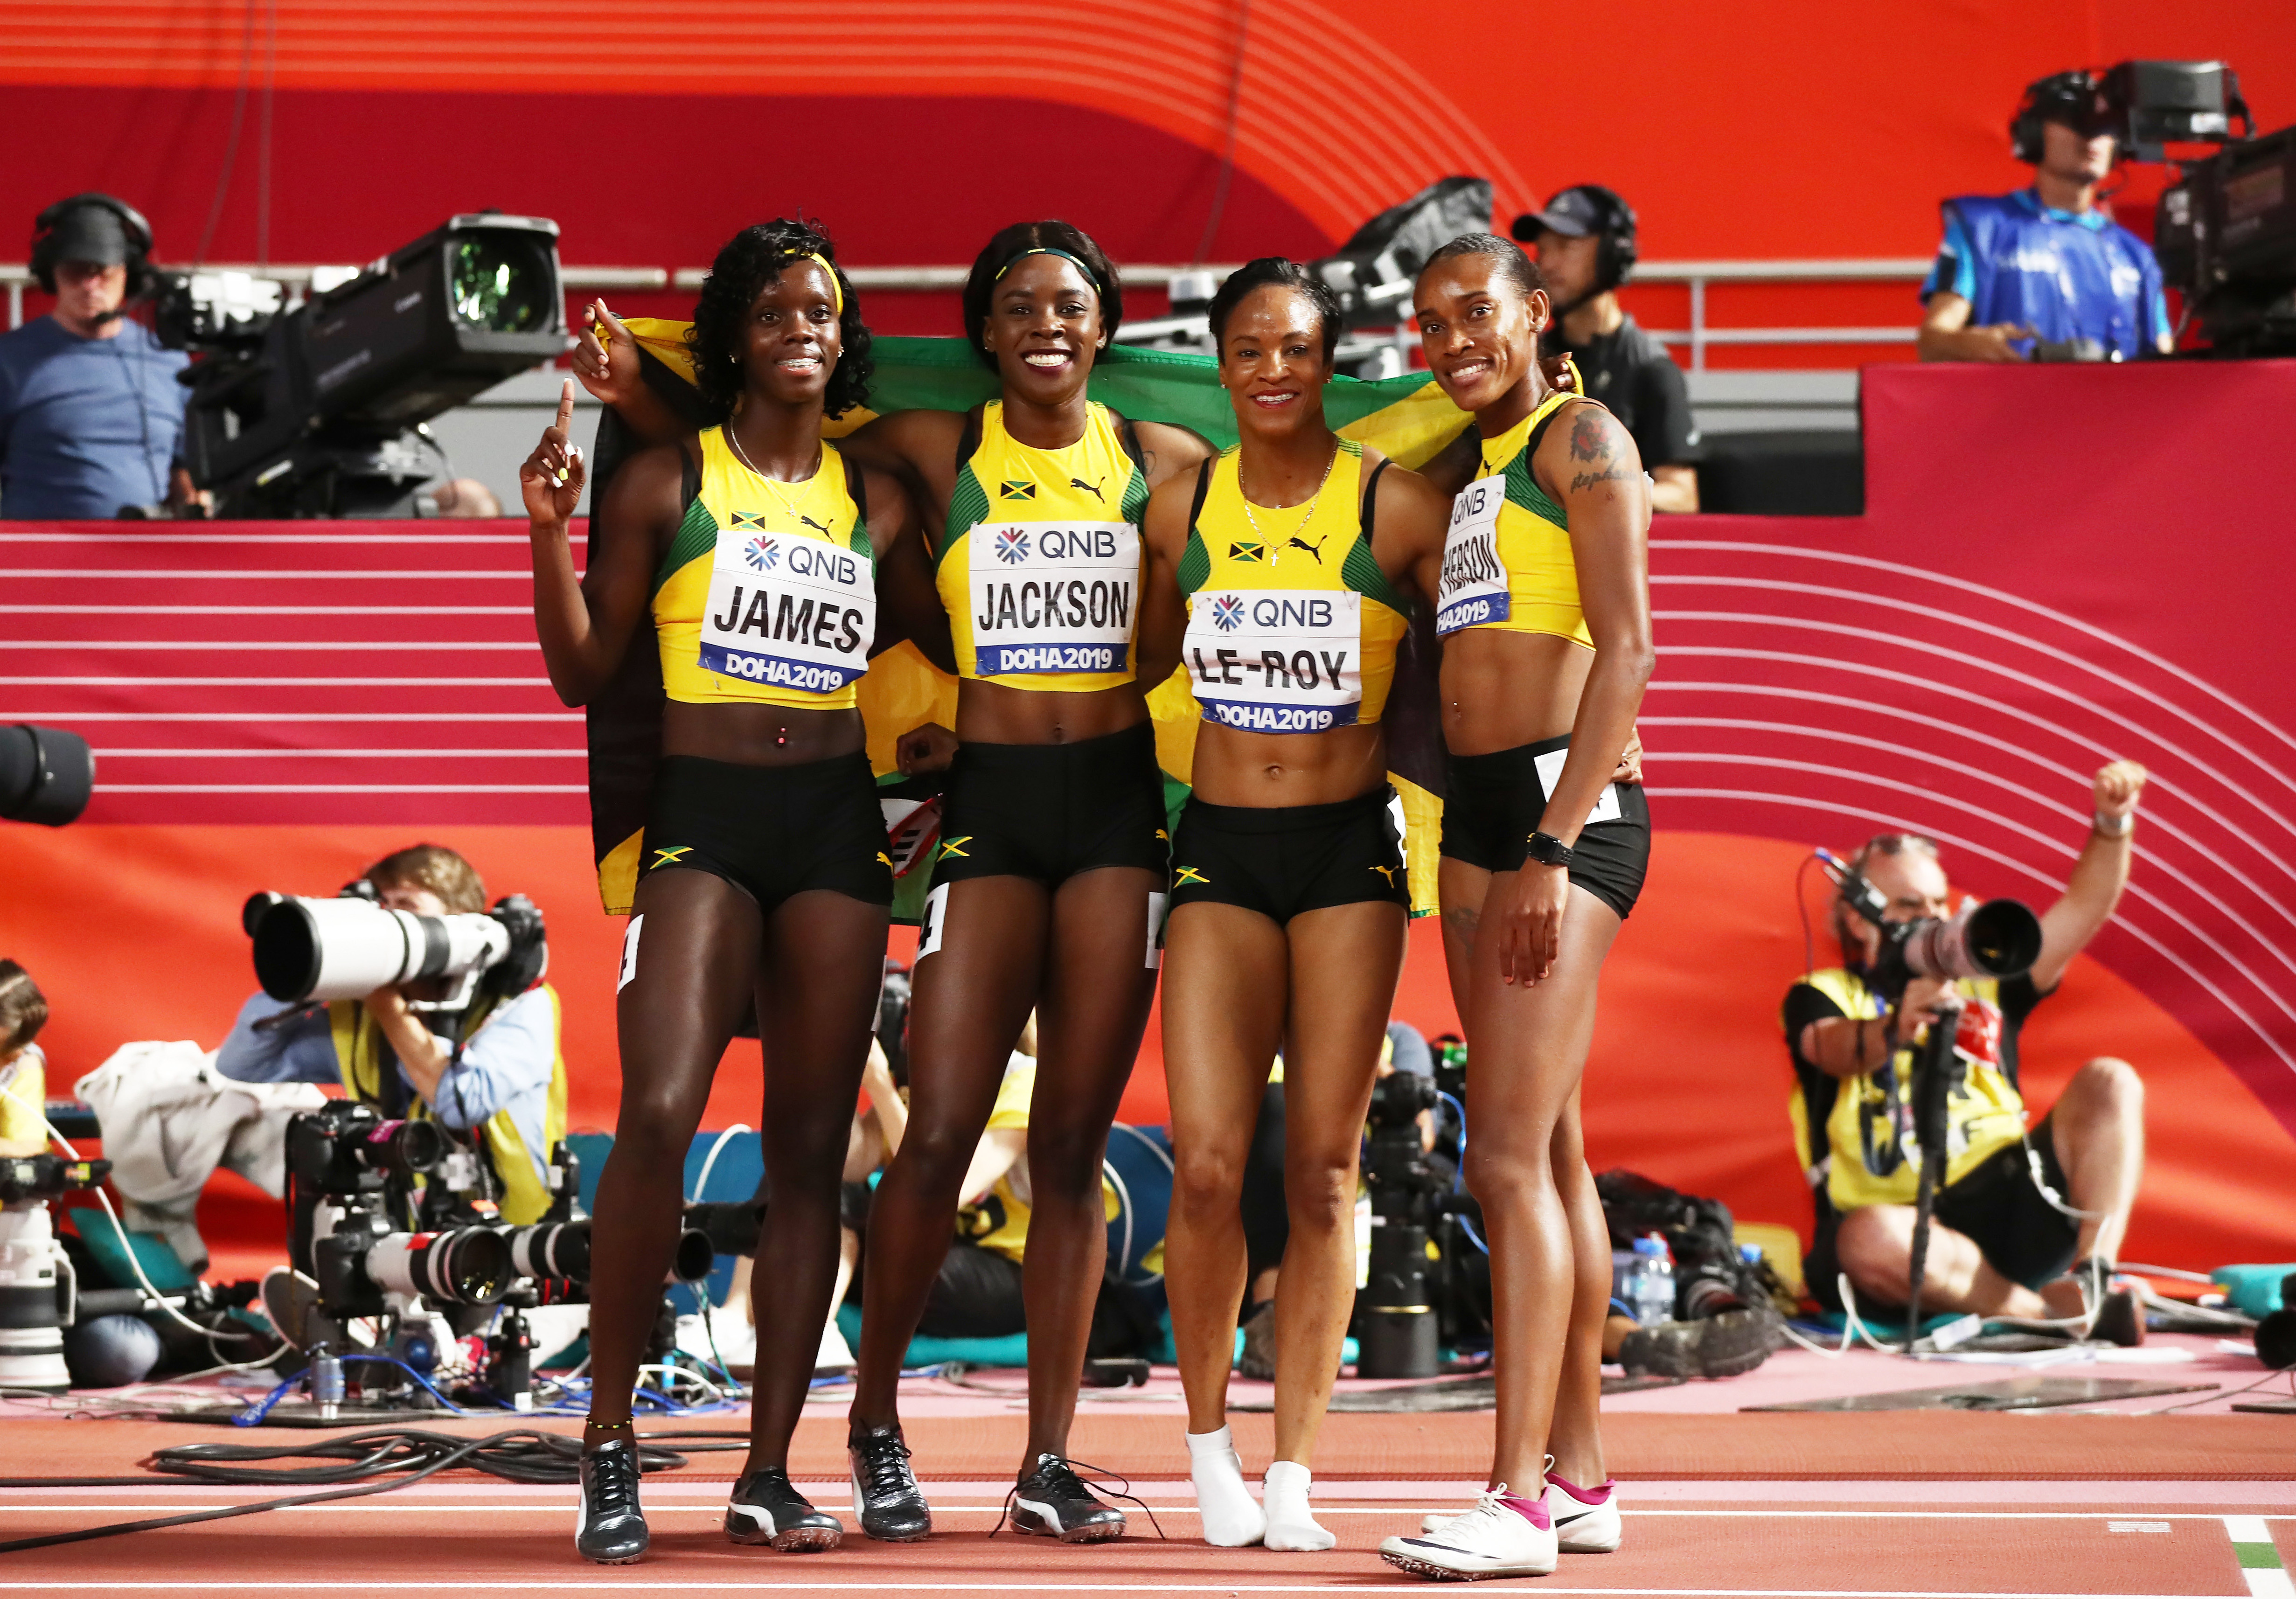 World Track And Field Champs